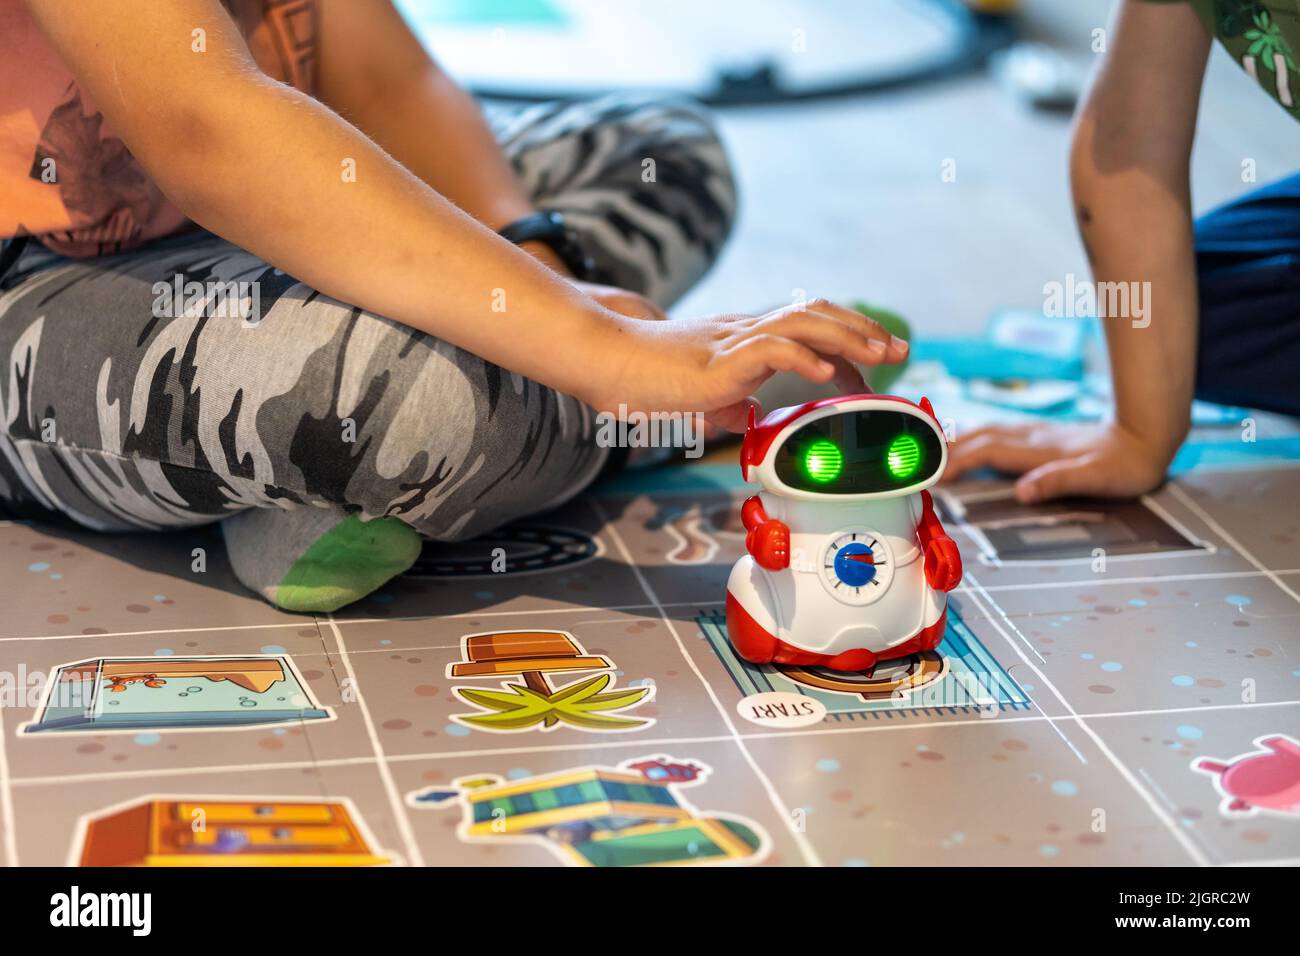 Two children playing with a Super Doc educational robot by Clementoni brand  on a mat Stock Photo - Alamy